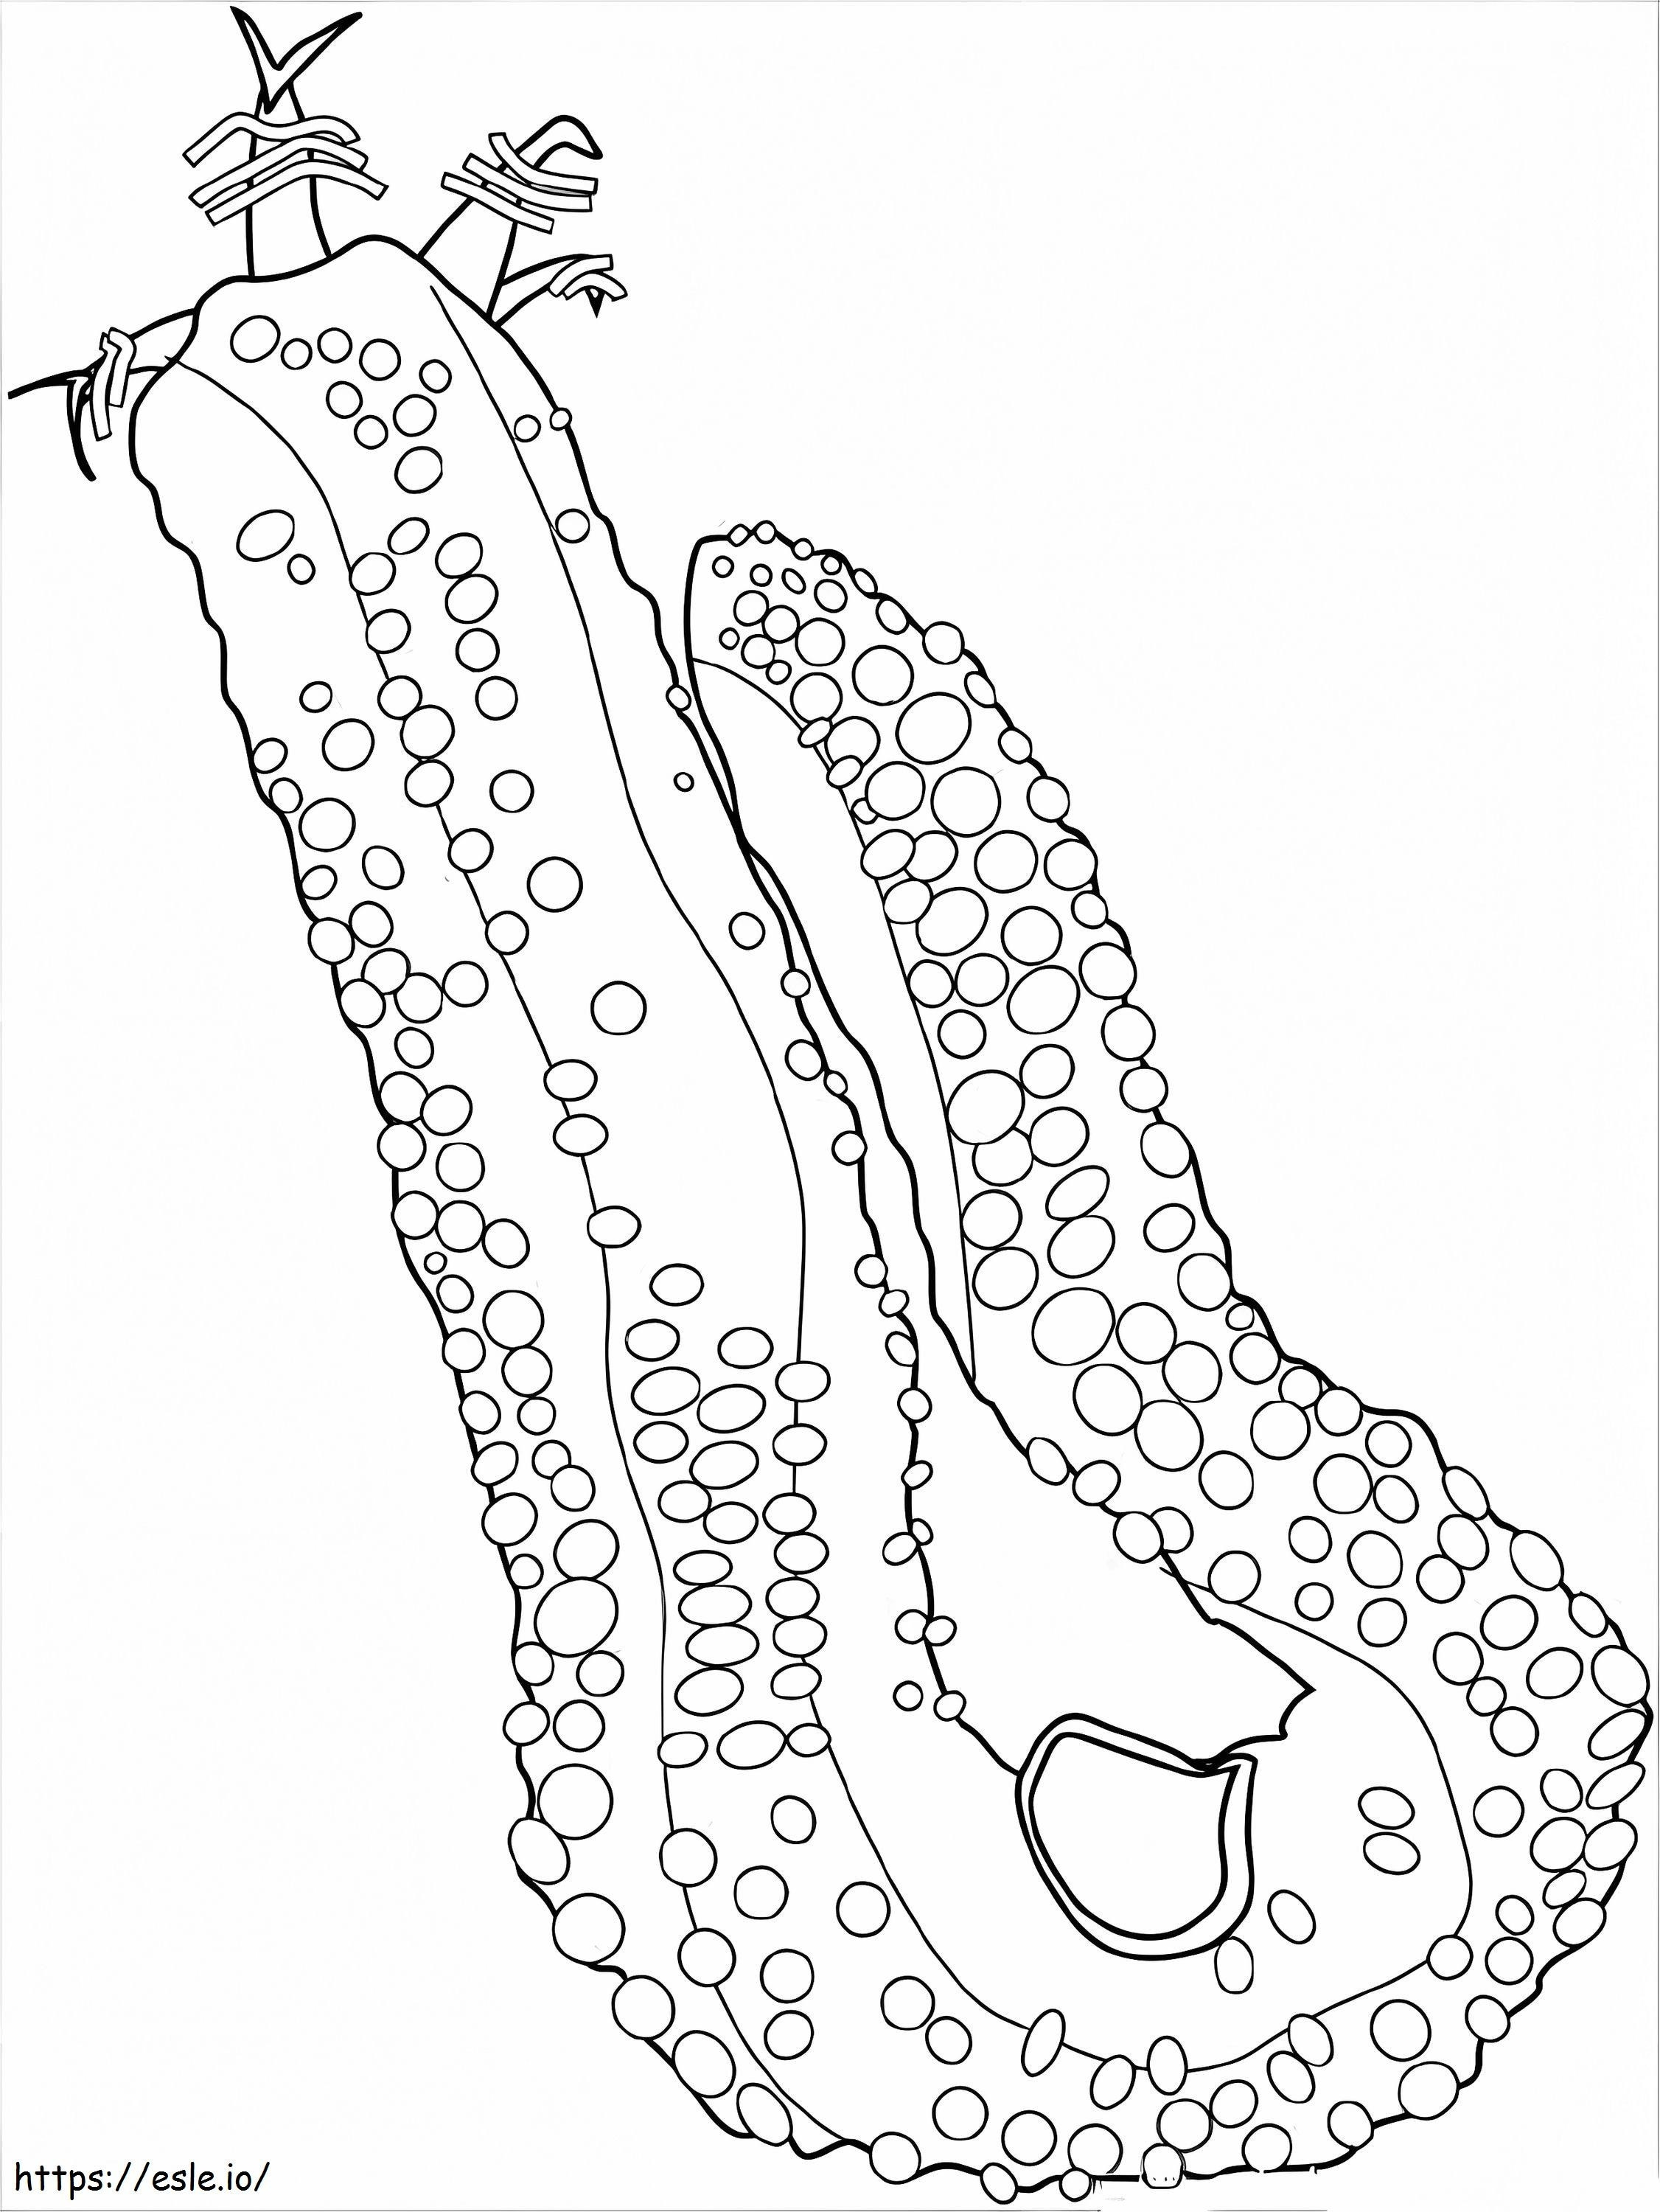 Free Sea Cucumber coloring page